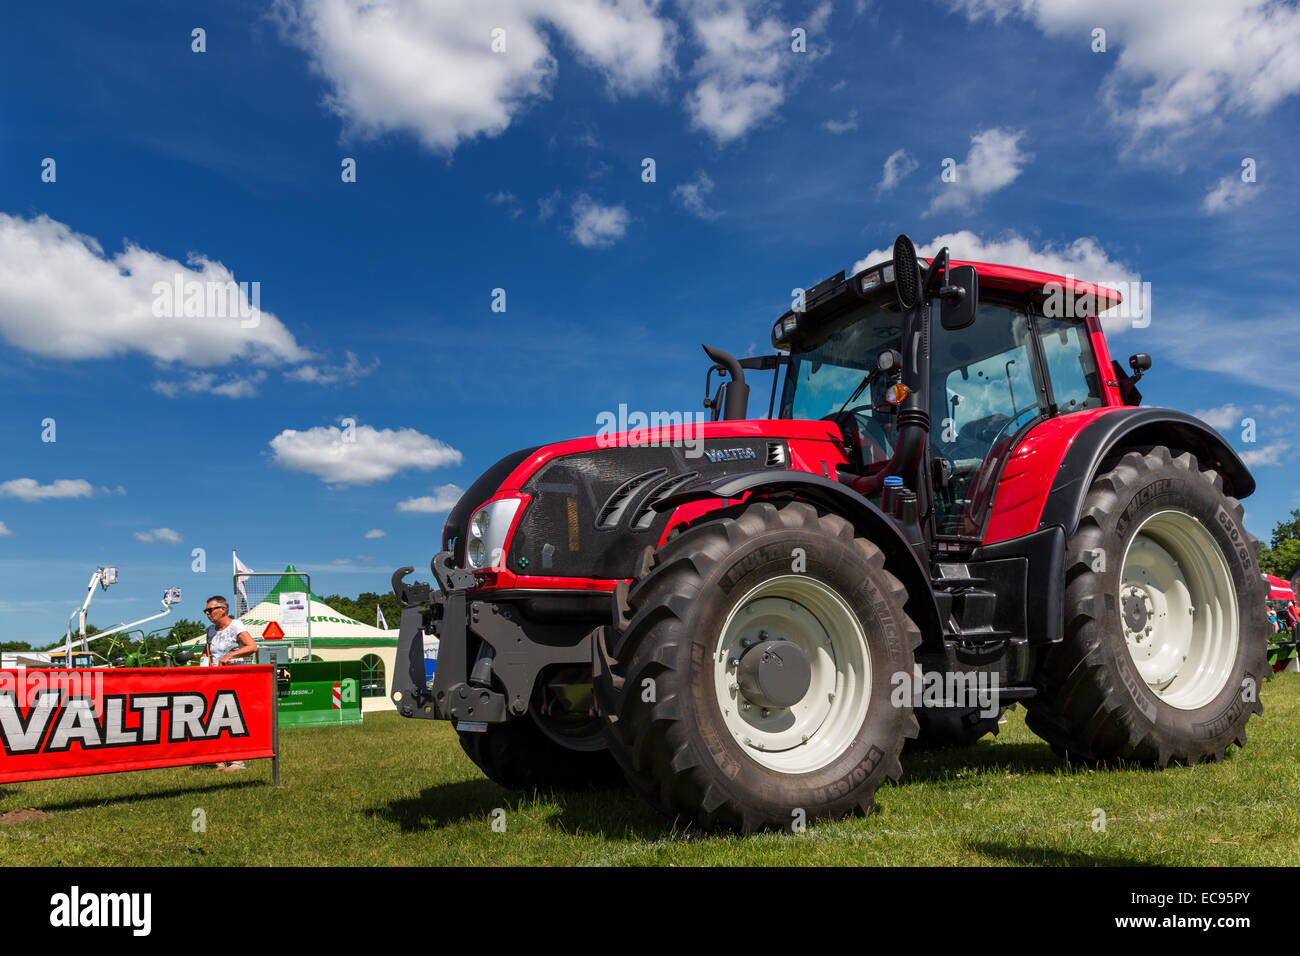 Display of agricultural equipment, Agricultural show, Valtra tractor, Funen Agricultural show, Odense, Denmark Stock Photo